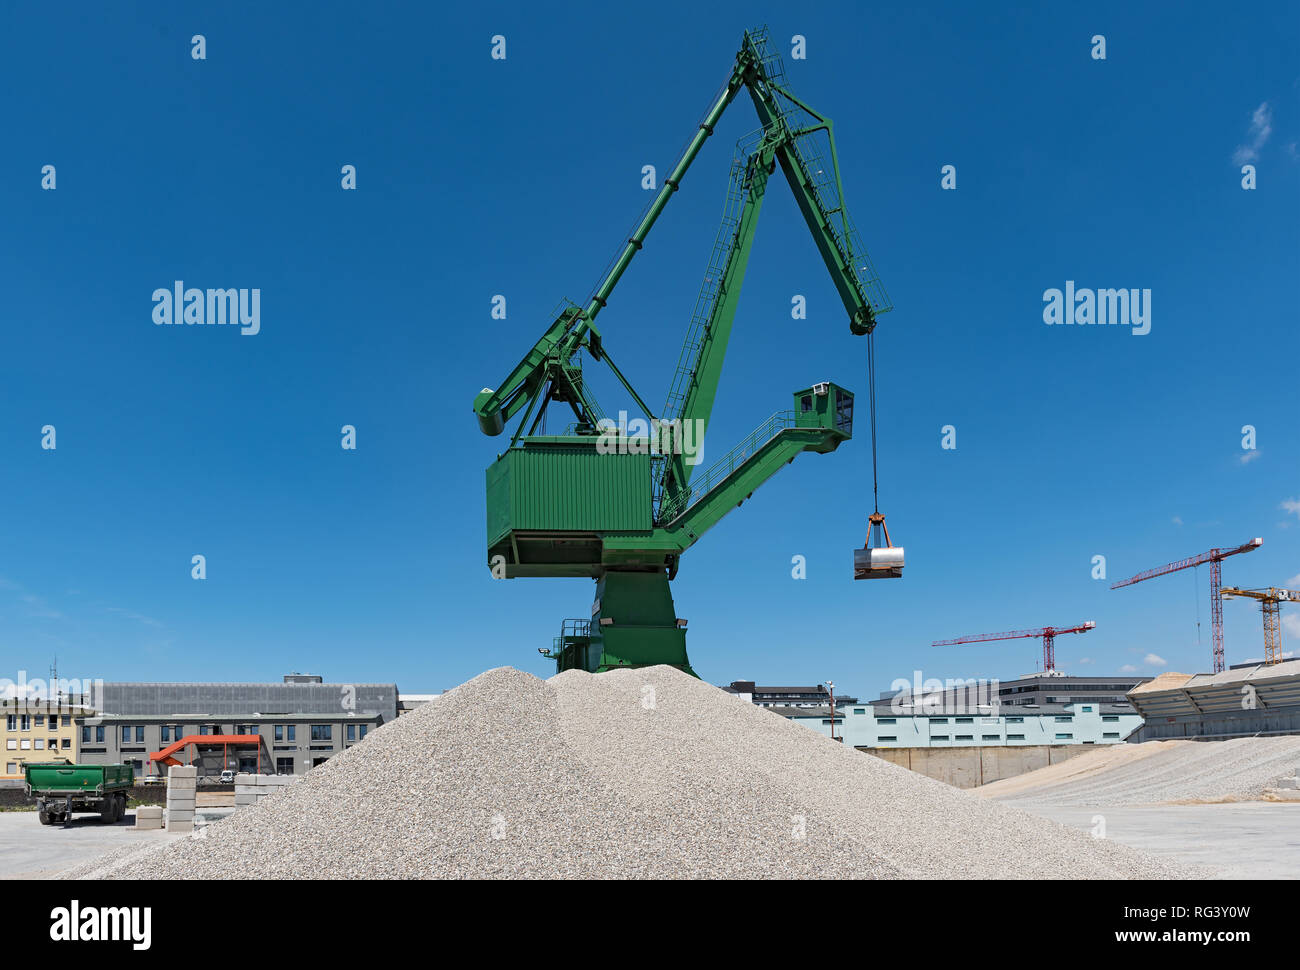 Exterior view of a cement factory with green crane Stock Photo